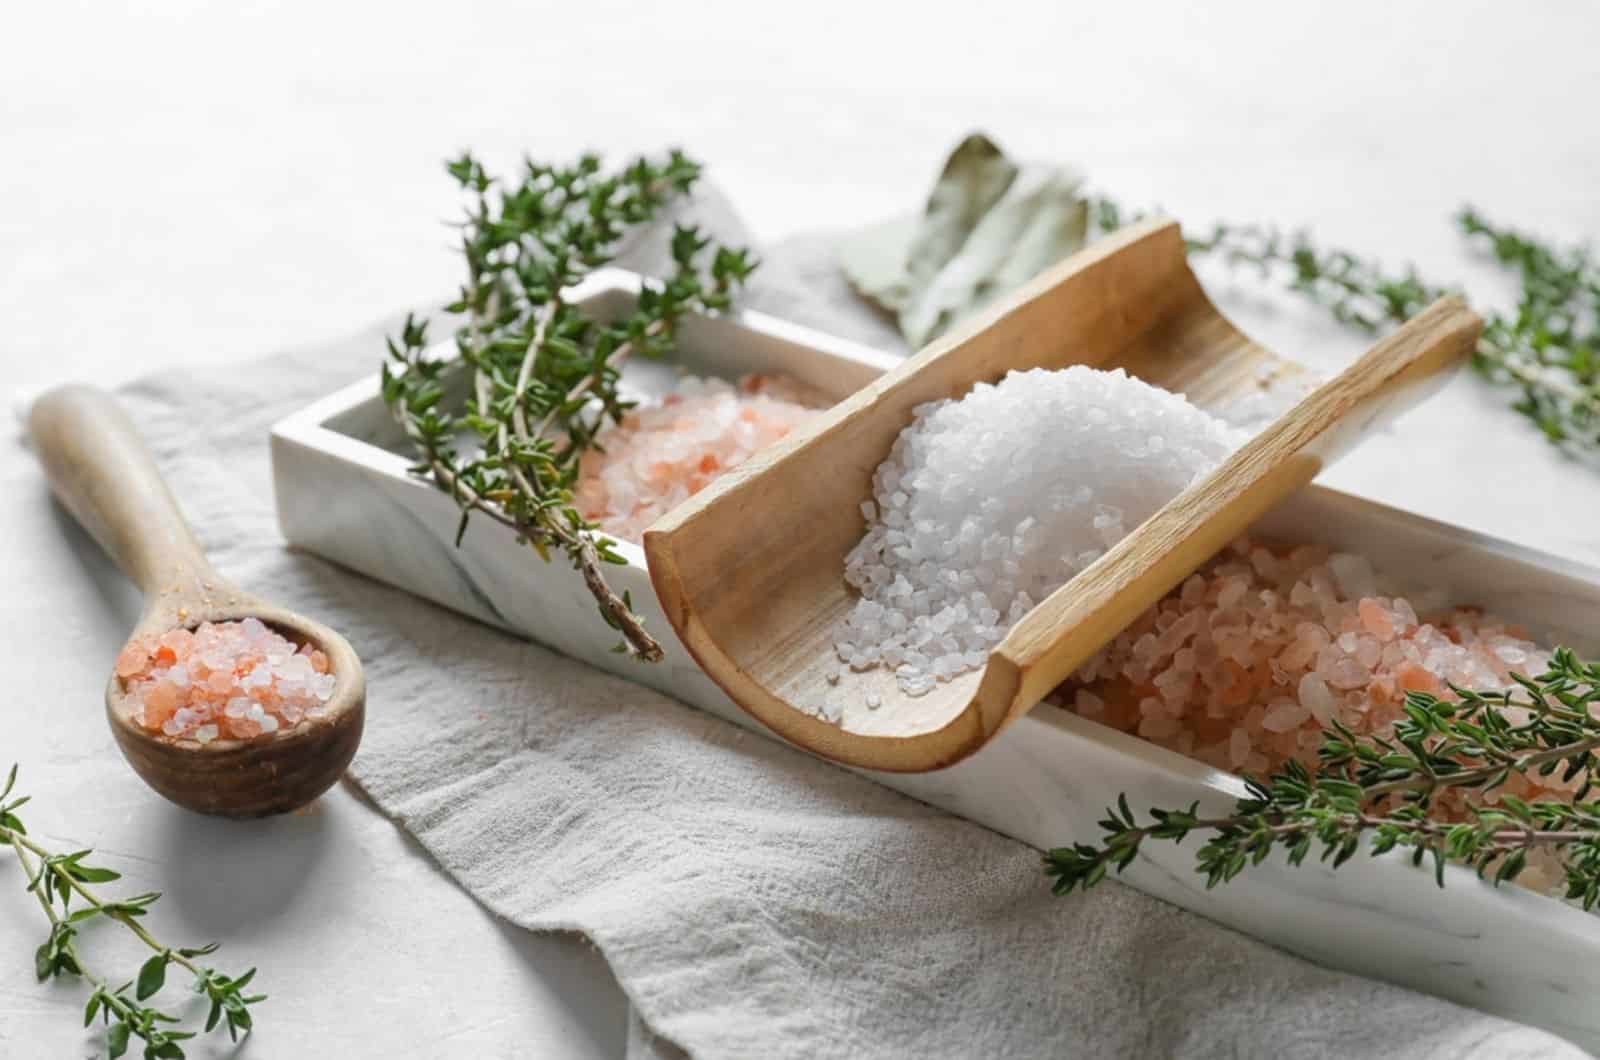 Composition with different salt and herbs